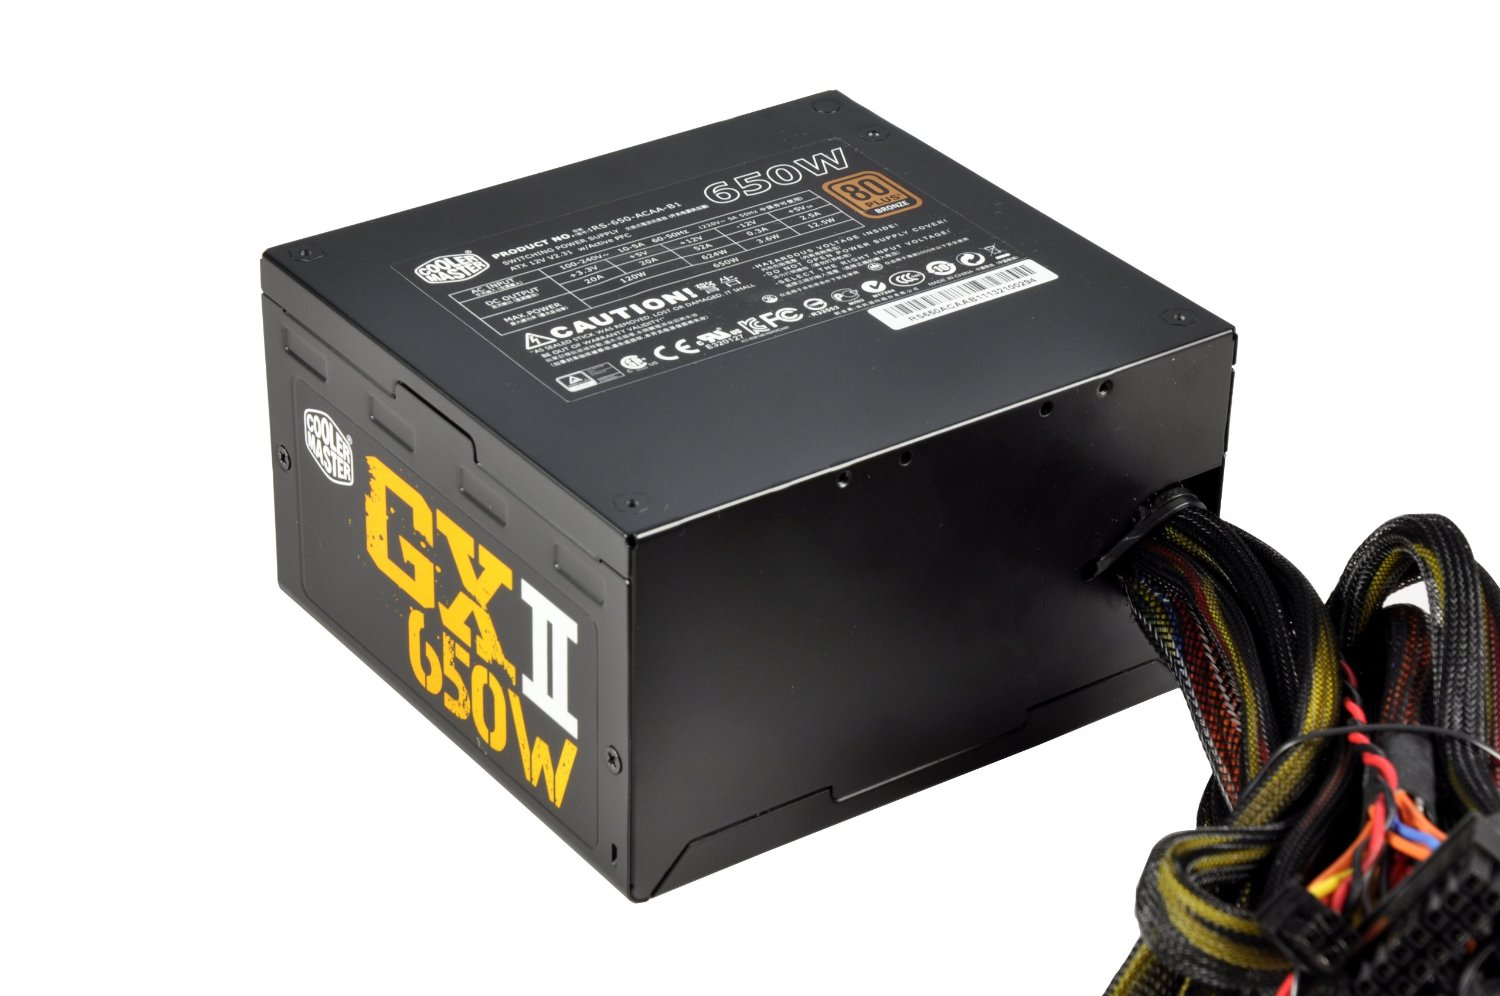 Cooler Master GX II - 650W 80 PLUS Bronze Power Supply with Non-Stop USB Charging